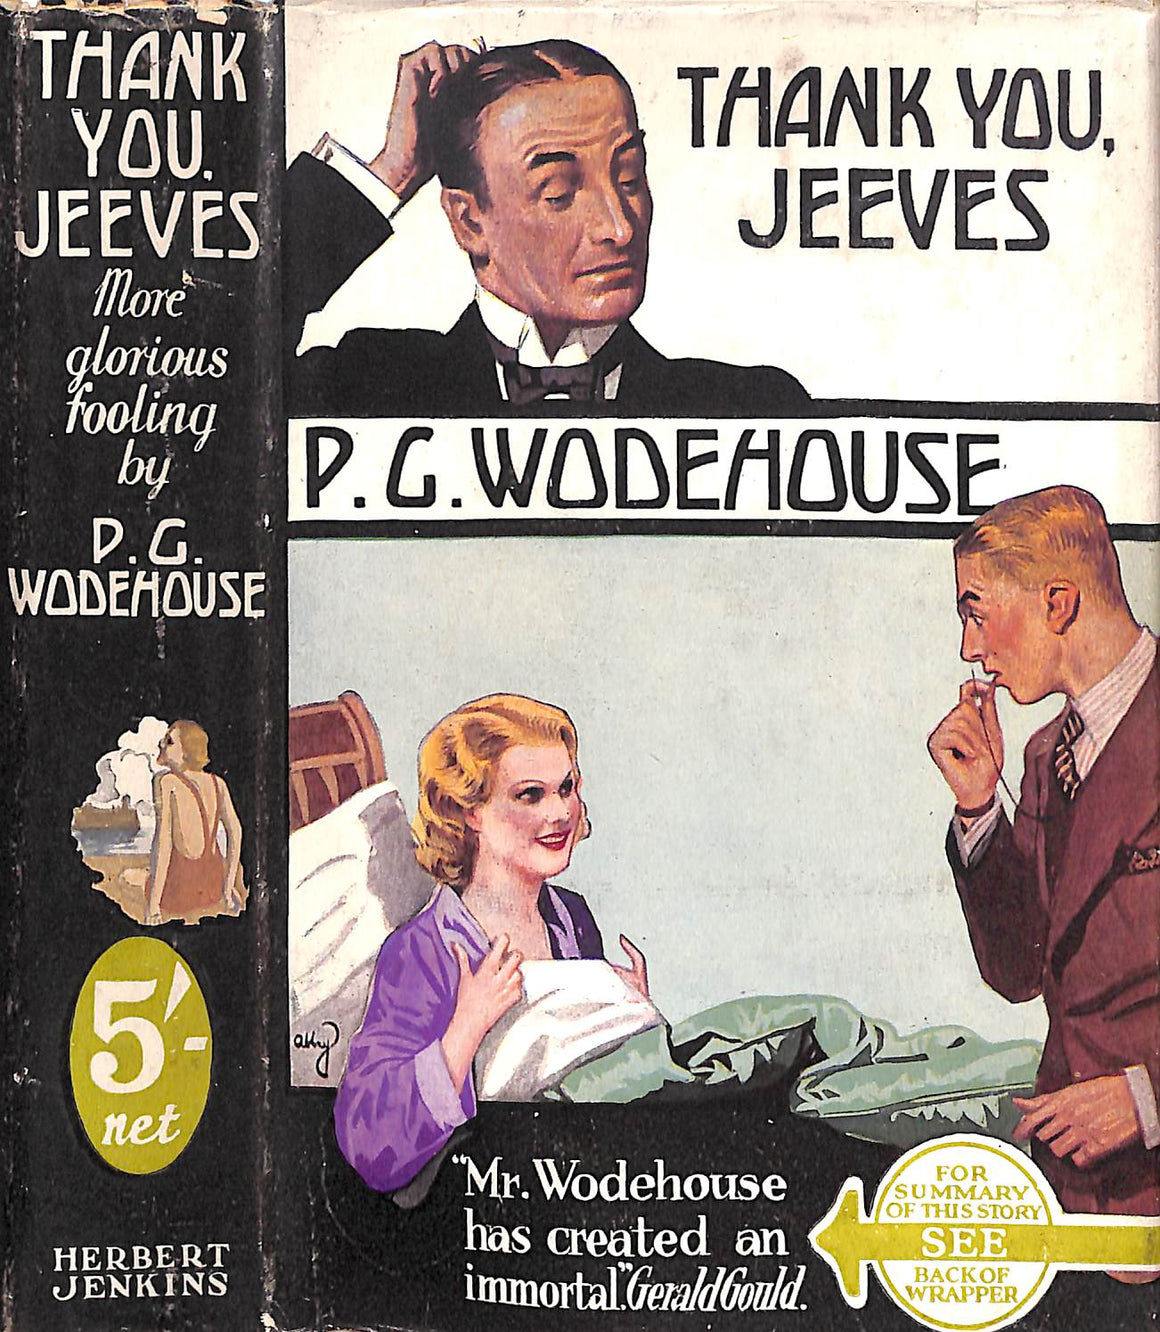 "Thank You, Jeeves" 1951 WODEHOUSE, P.G.